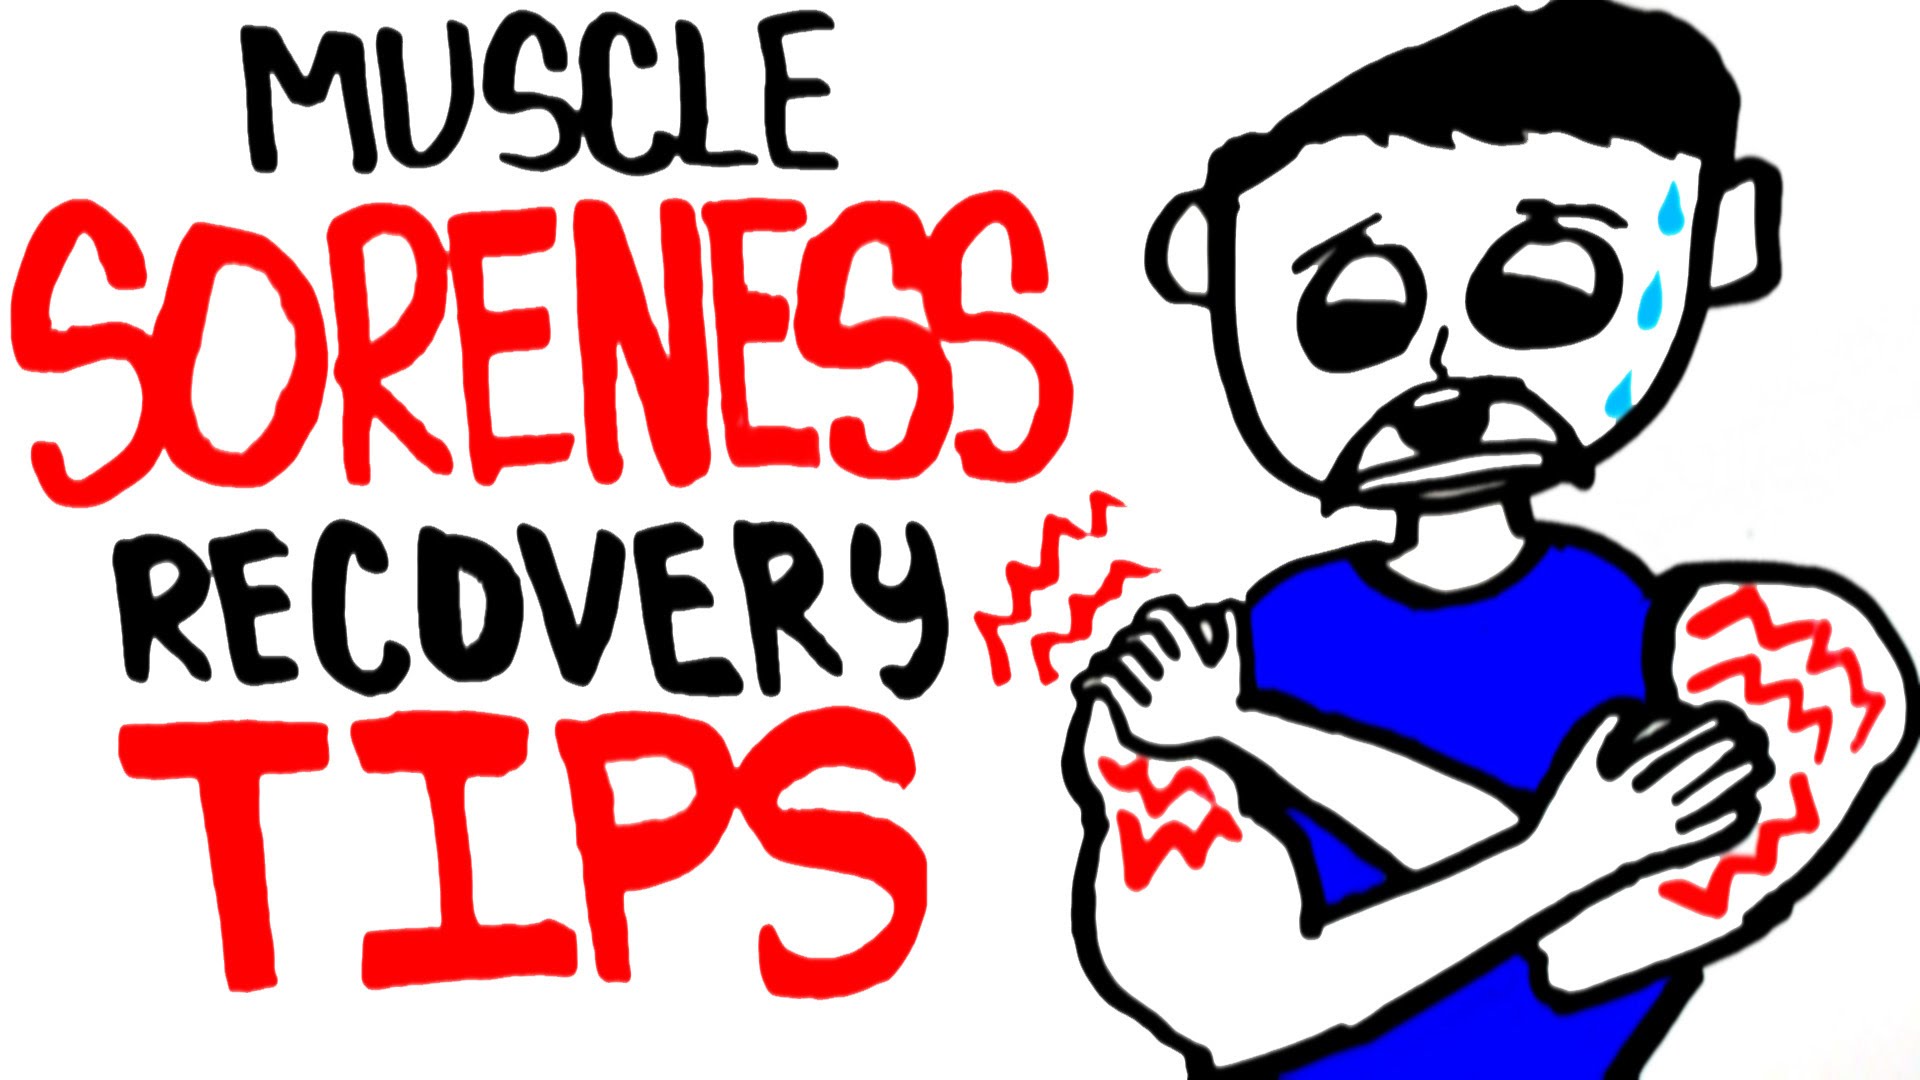 Muscle Soreness and Recovery Tips – Relieve Muscles FAST!